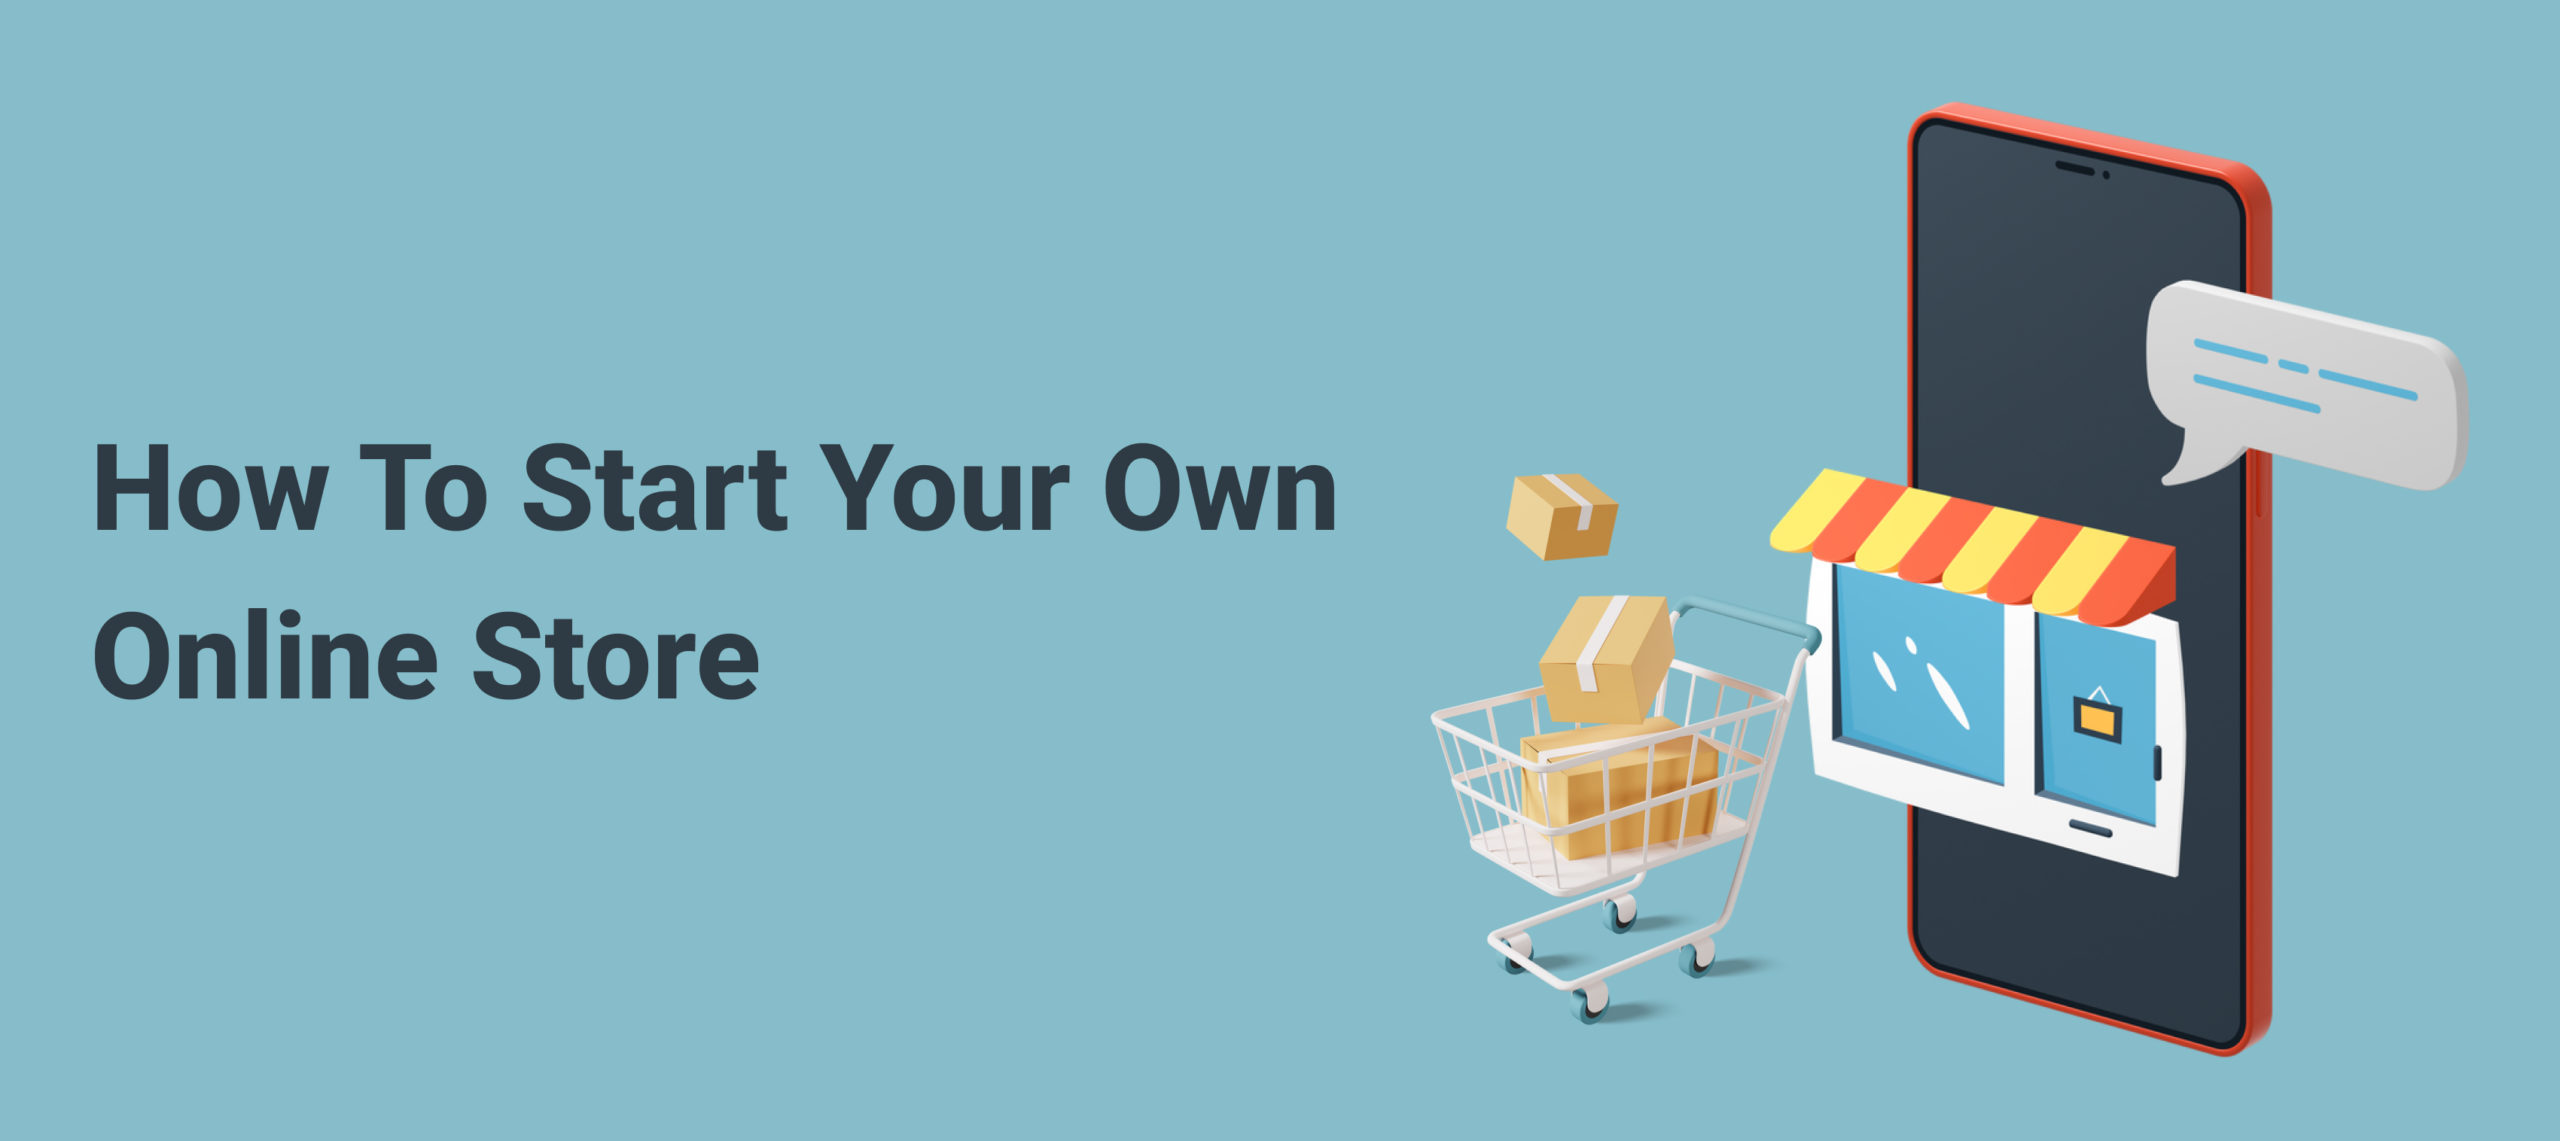  How To Start Your Own Online Store: A Step By Step Guide